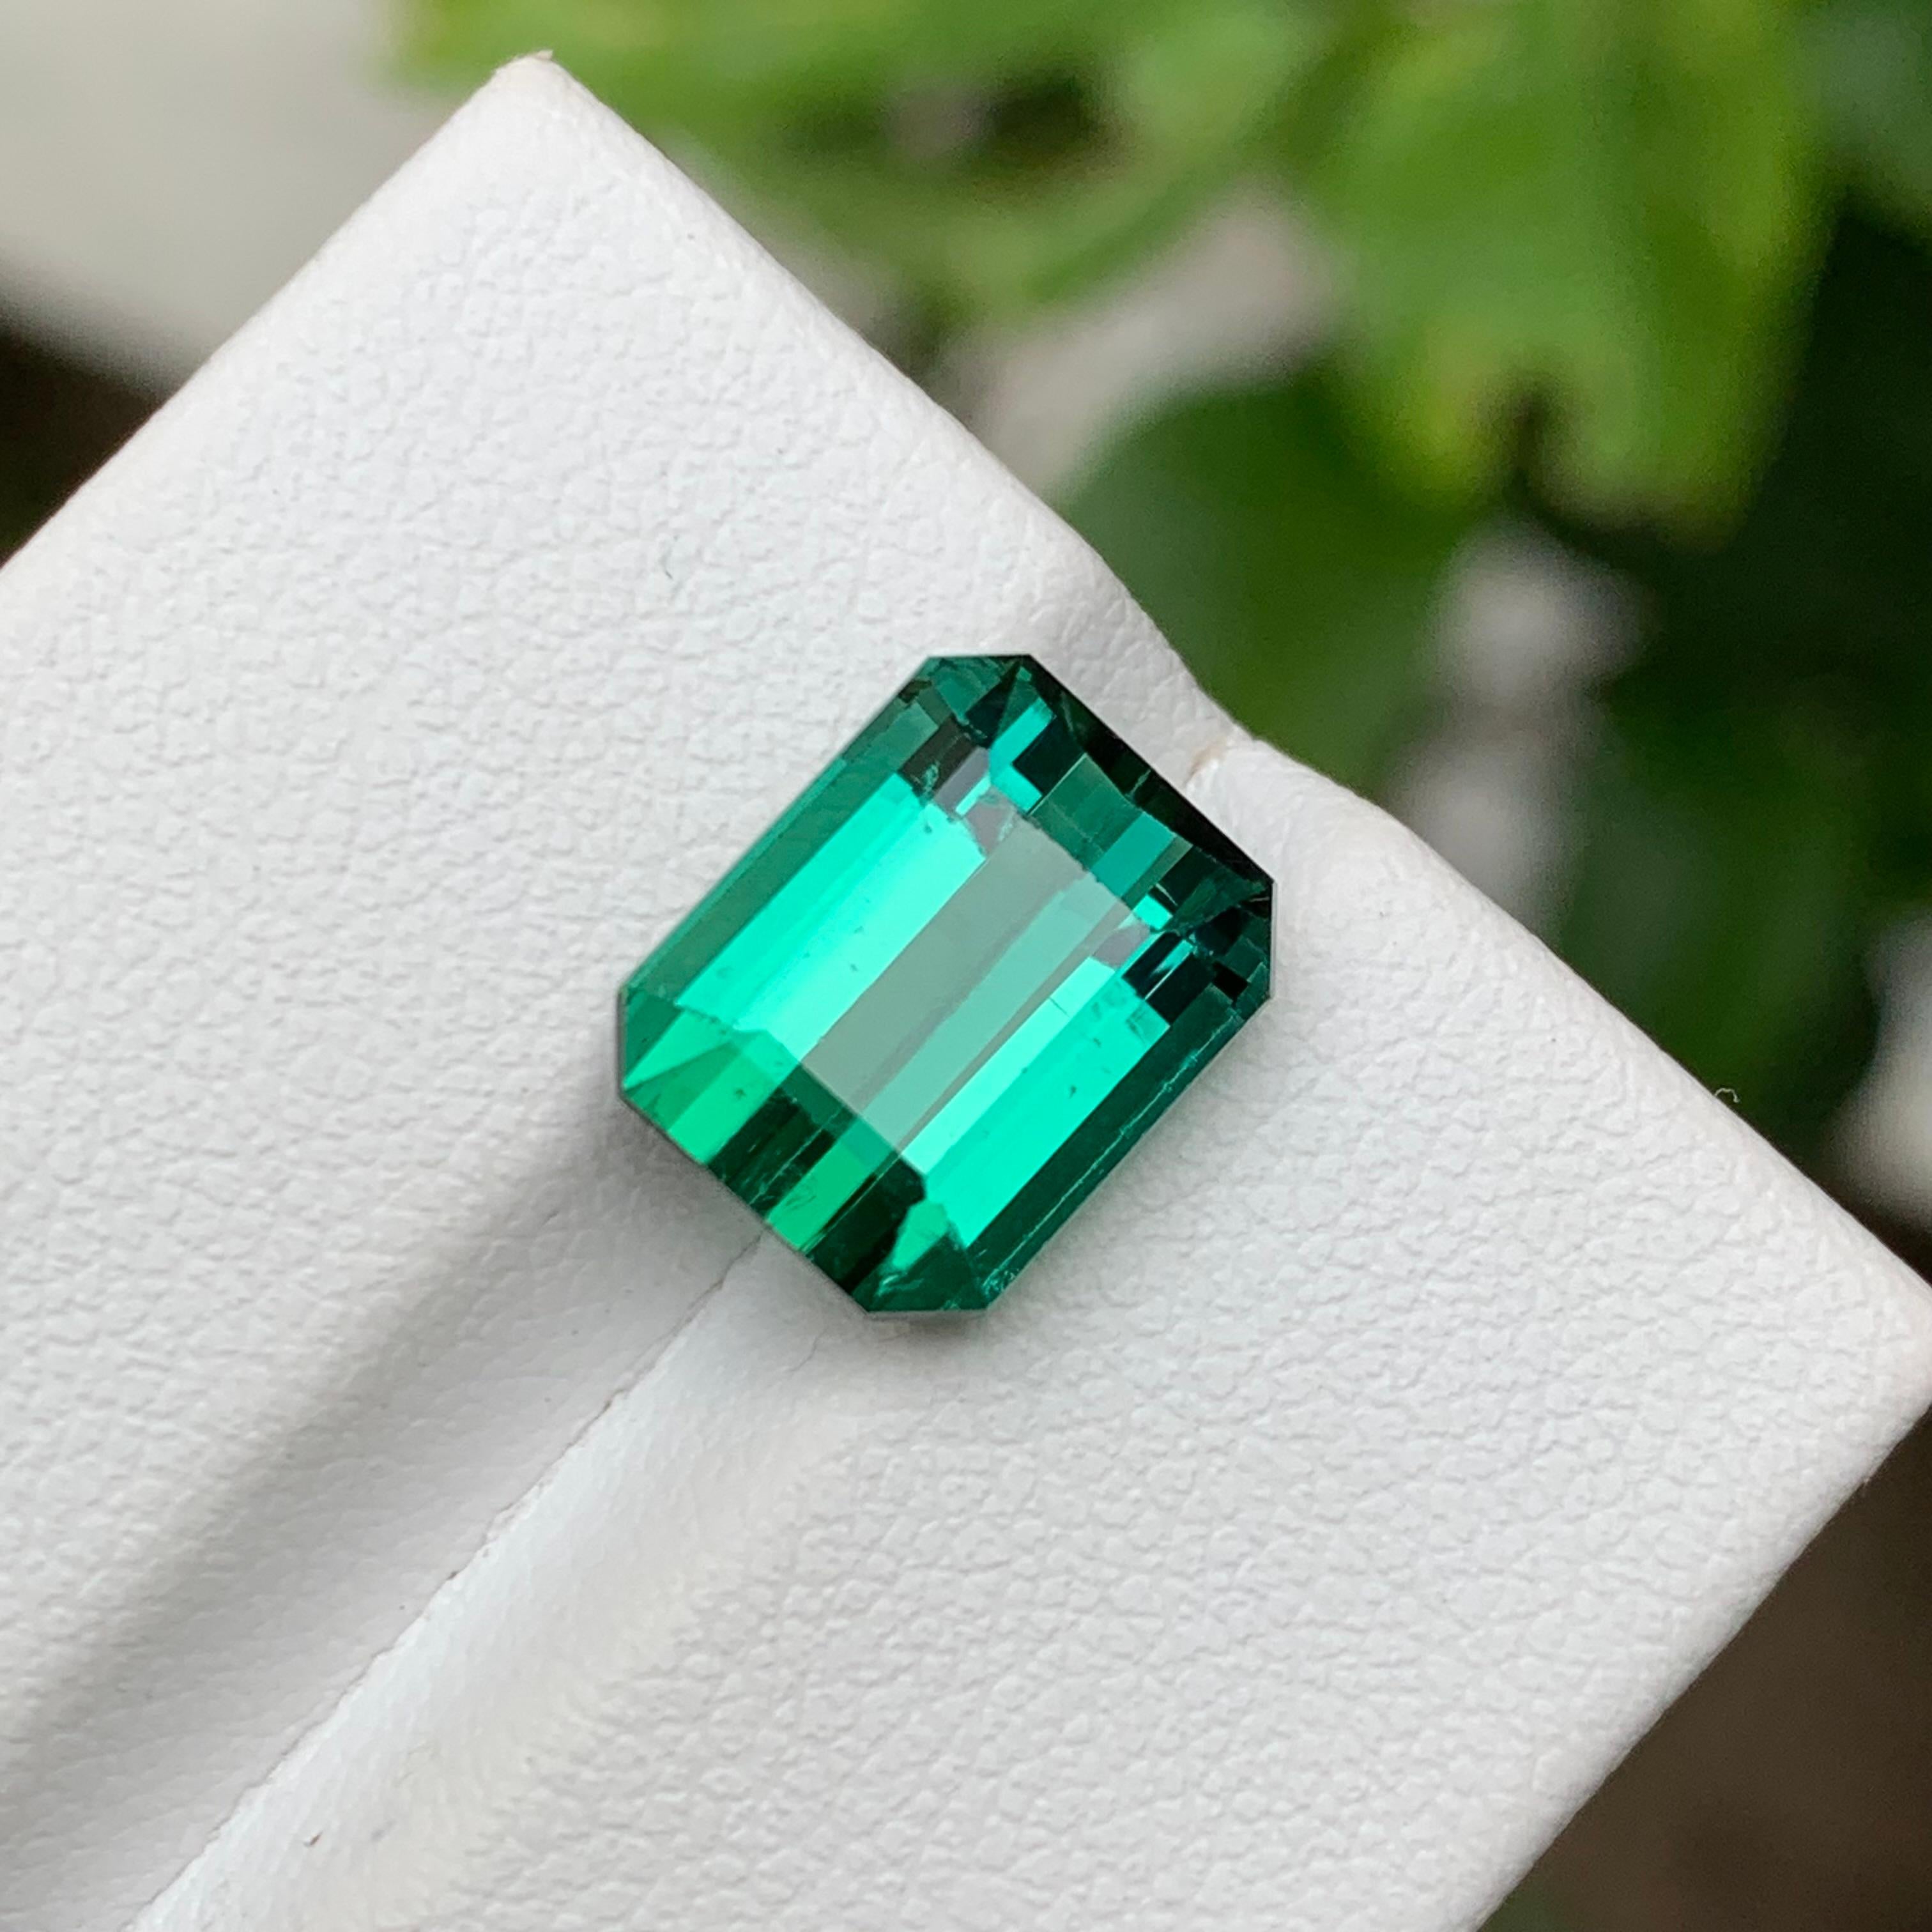 GEMSTONE TYPE: Tourmaline
PIECE(S): 1
WEIGHT: 5.65 Carats
SHAPE: Emerald 
SIZE (MM): 10.68 x 8.59 x 6.95
COLOR: Bluish Green
CLARITY: Slightly Included Approx 95% Eye Clean
TREATMENT: None
ORIGIN: Afghanistan 🇦🇫 
CERTIFICATE: On demand
(if you